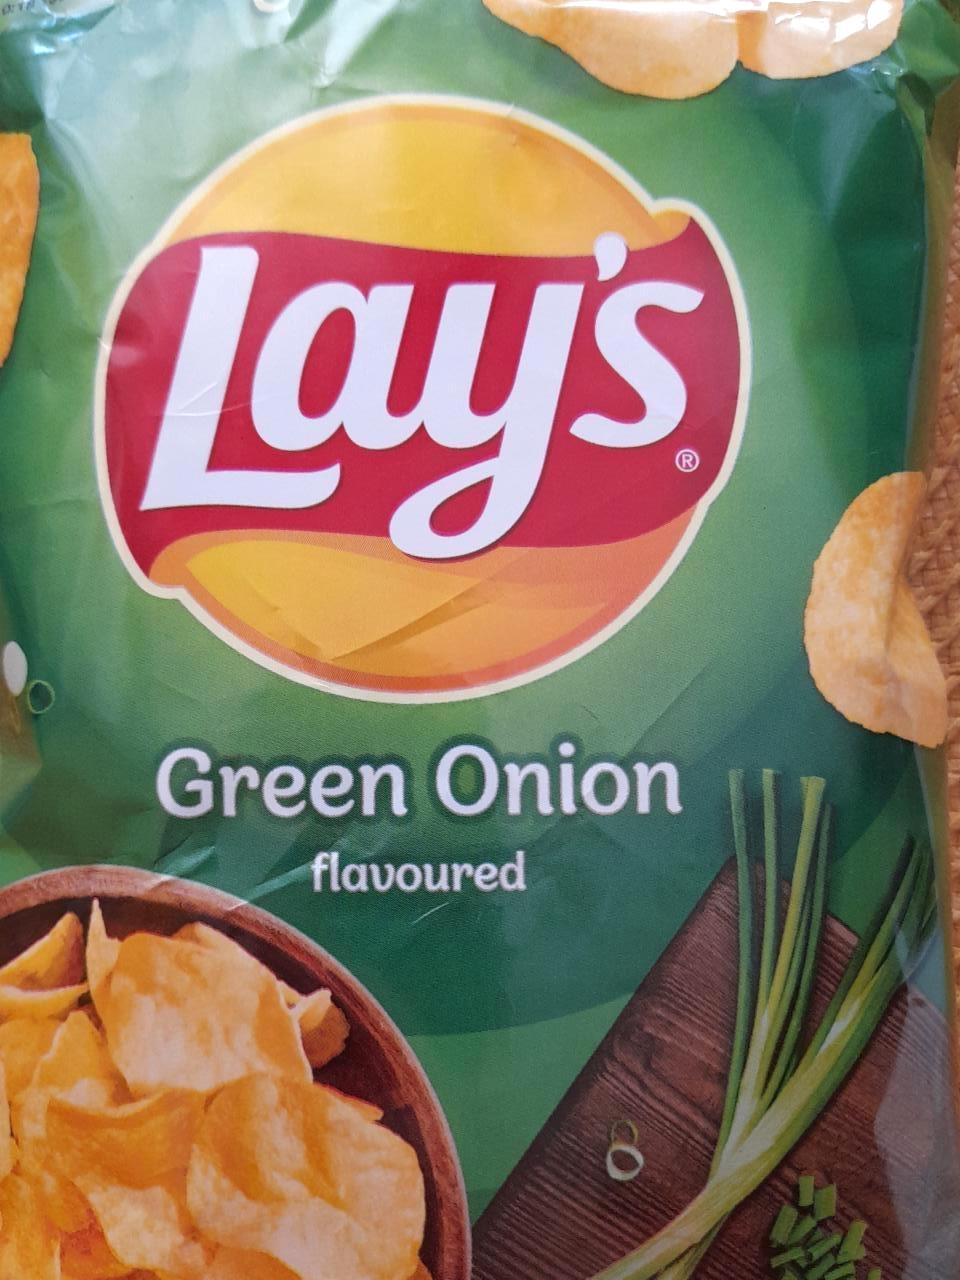 Képek - Green onion flavoured chips Lay's